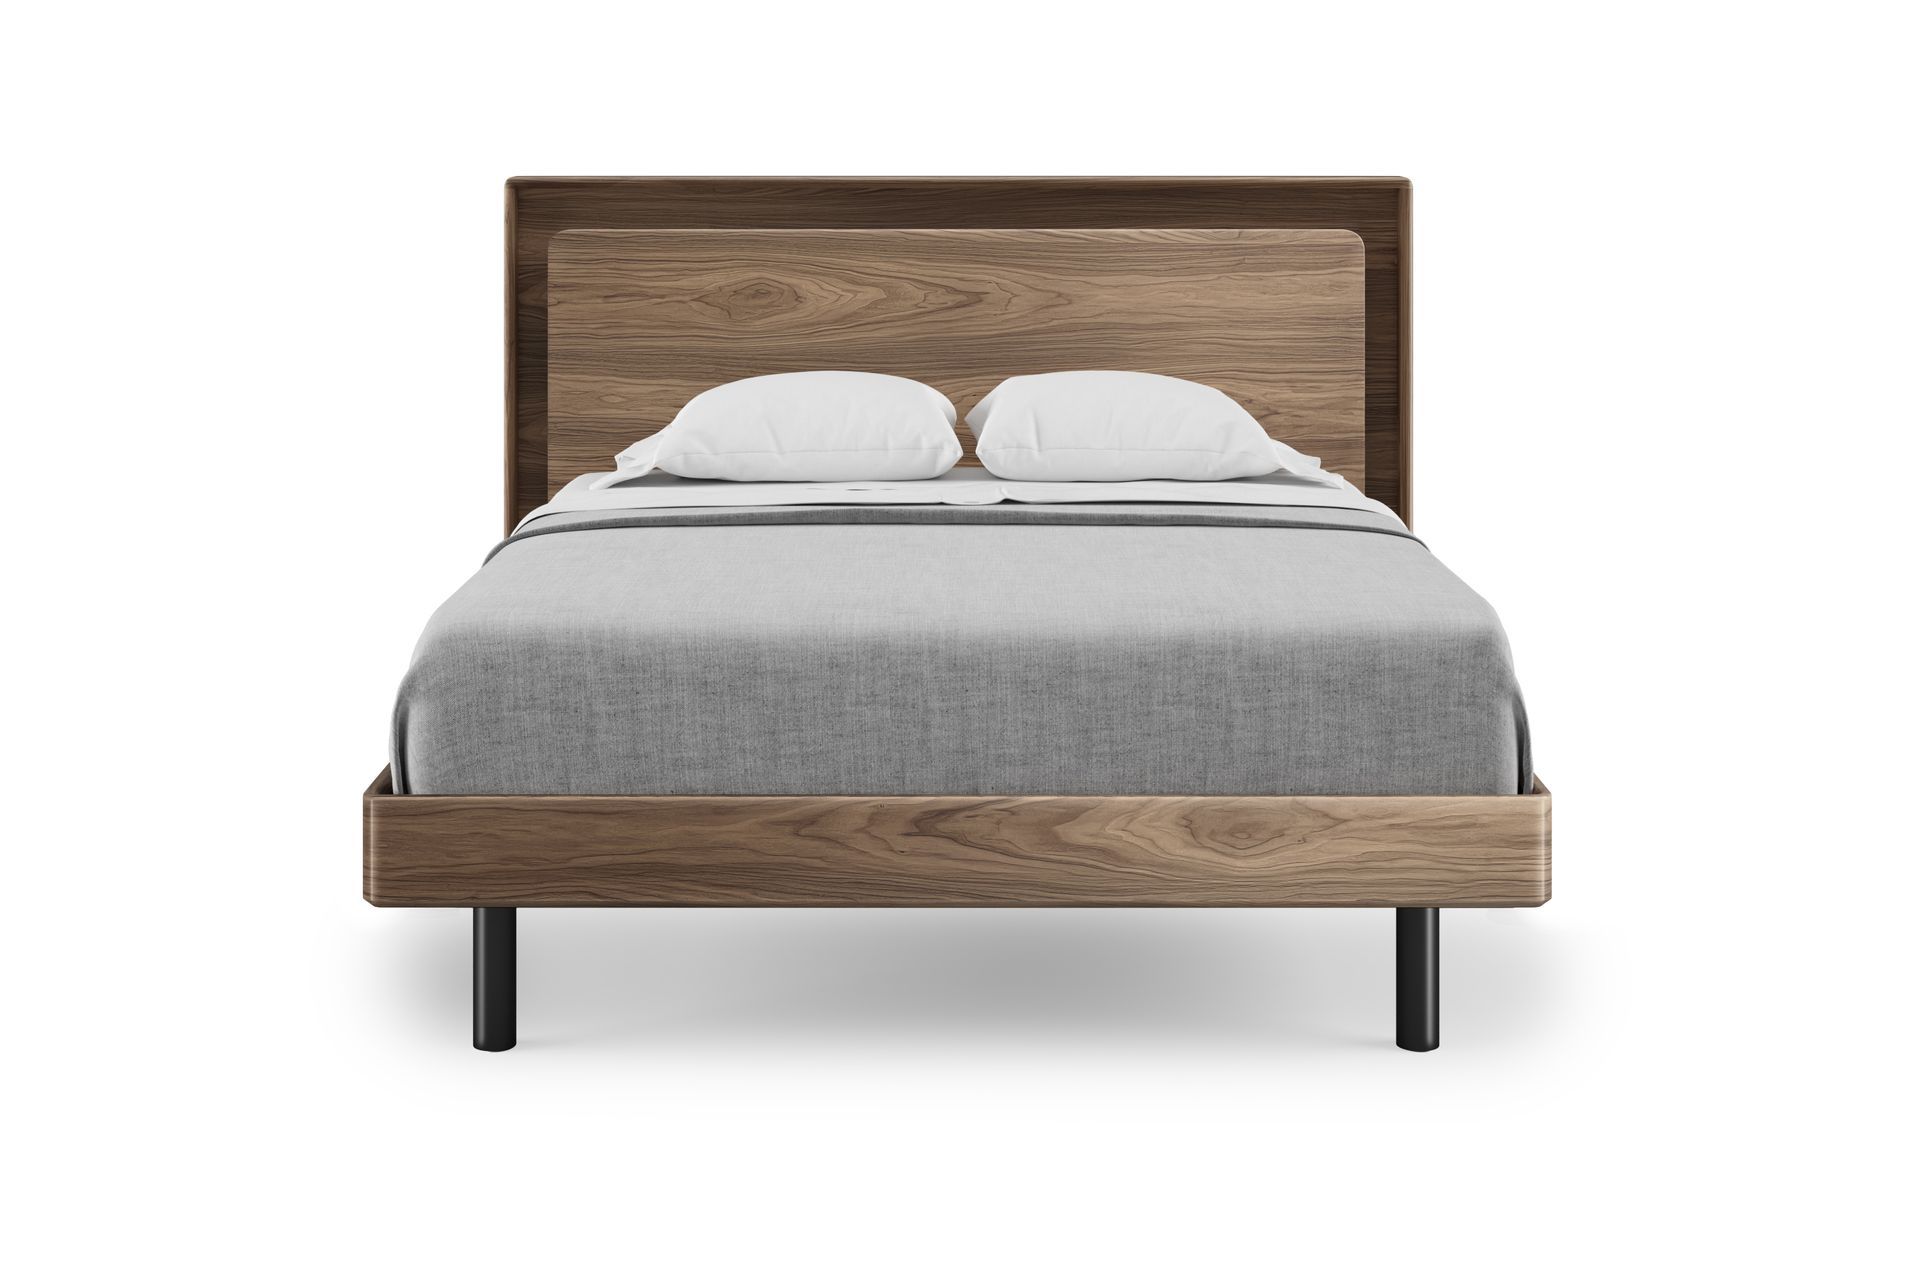 Up-LINQ 9117 Modern Queen Bed With Charging Stations | BDI Furniture